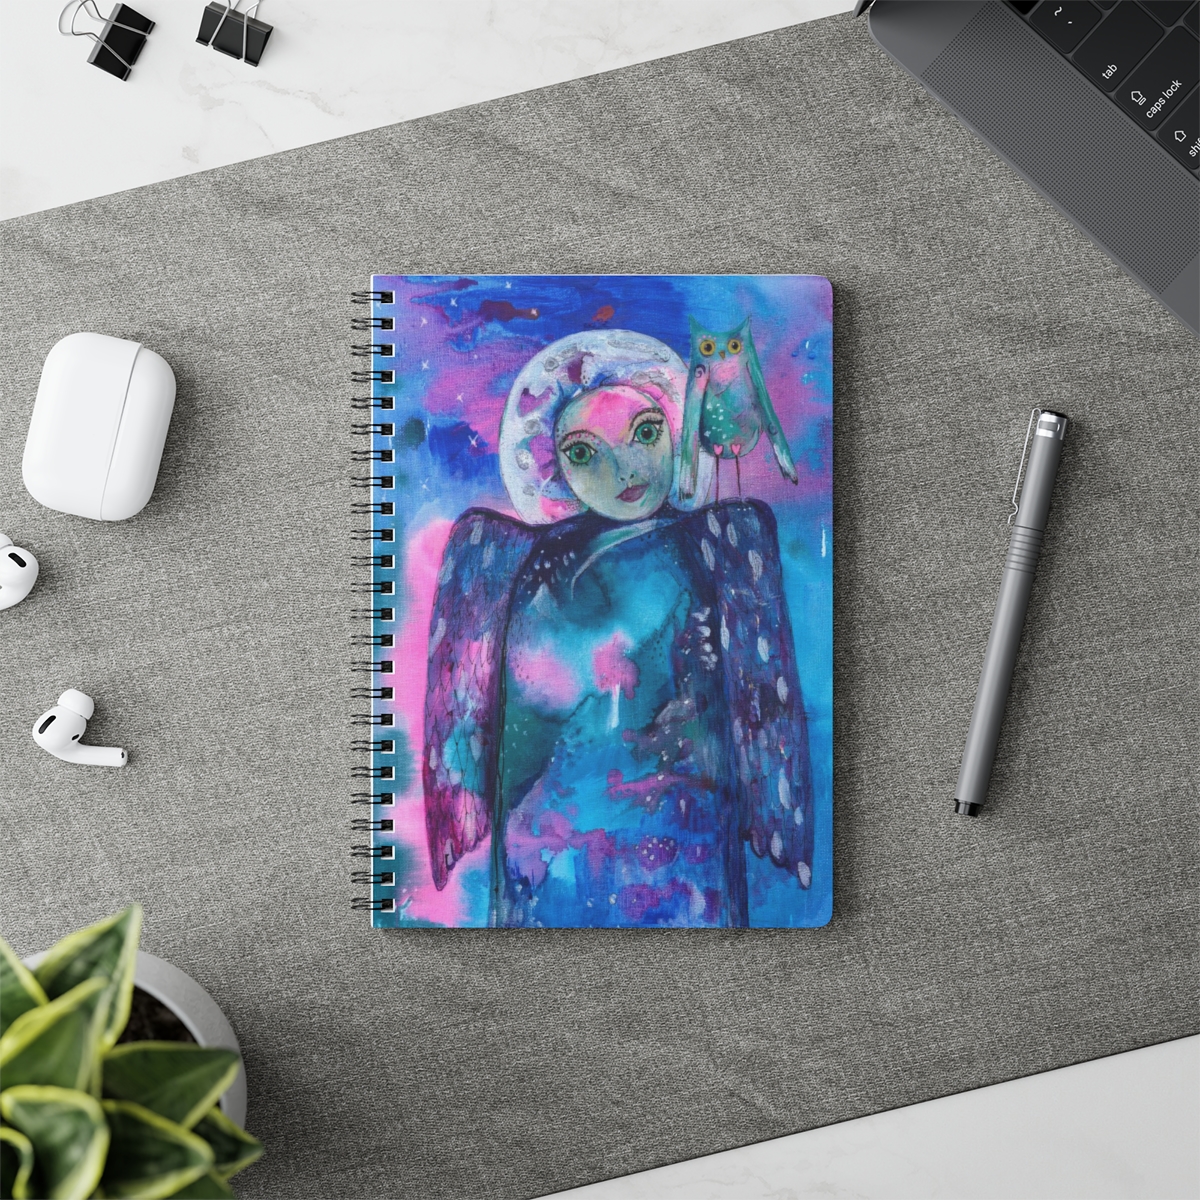 Angel notebook in context. It takes the image - guardian angel of Intuition - she is created from abstract blues and pinks. Her moon like face is surrounded by a silver halo and she has an owl on her shoulder.